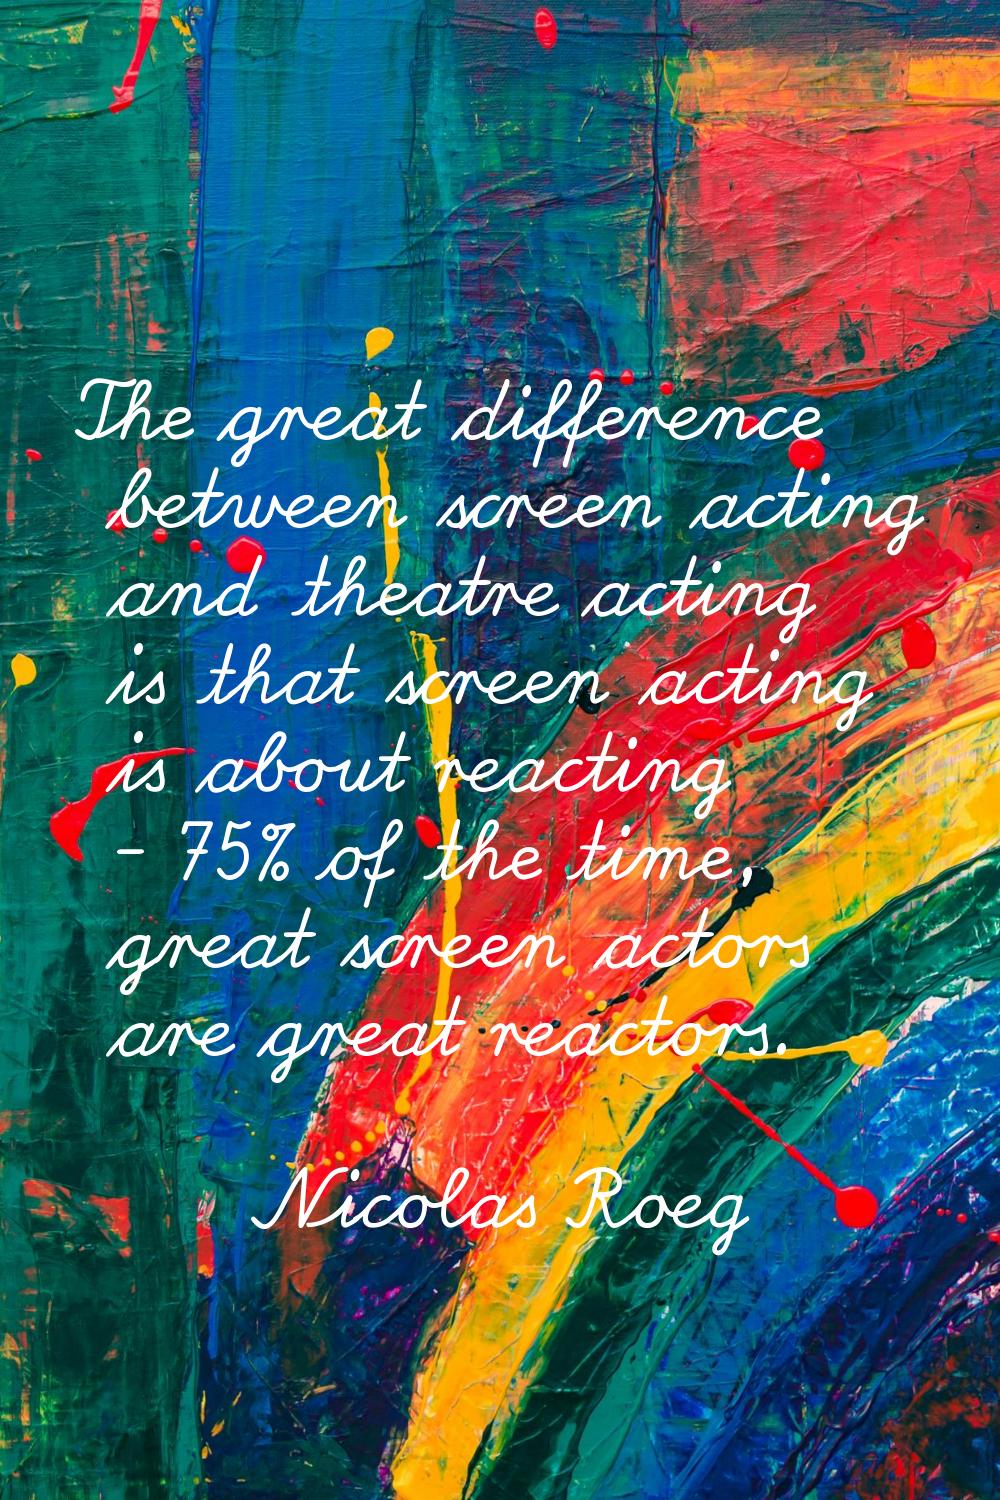 The great difference between screen acting and theatre acting is that screen acting is about reacti